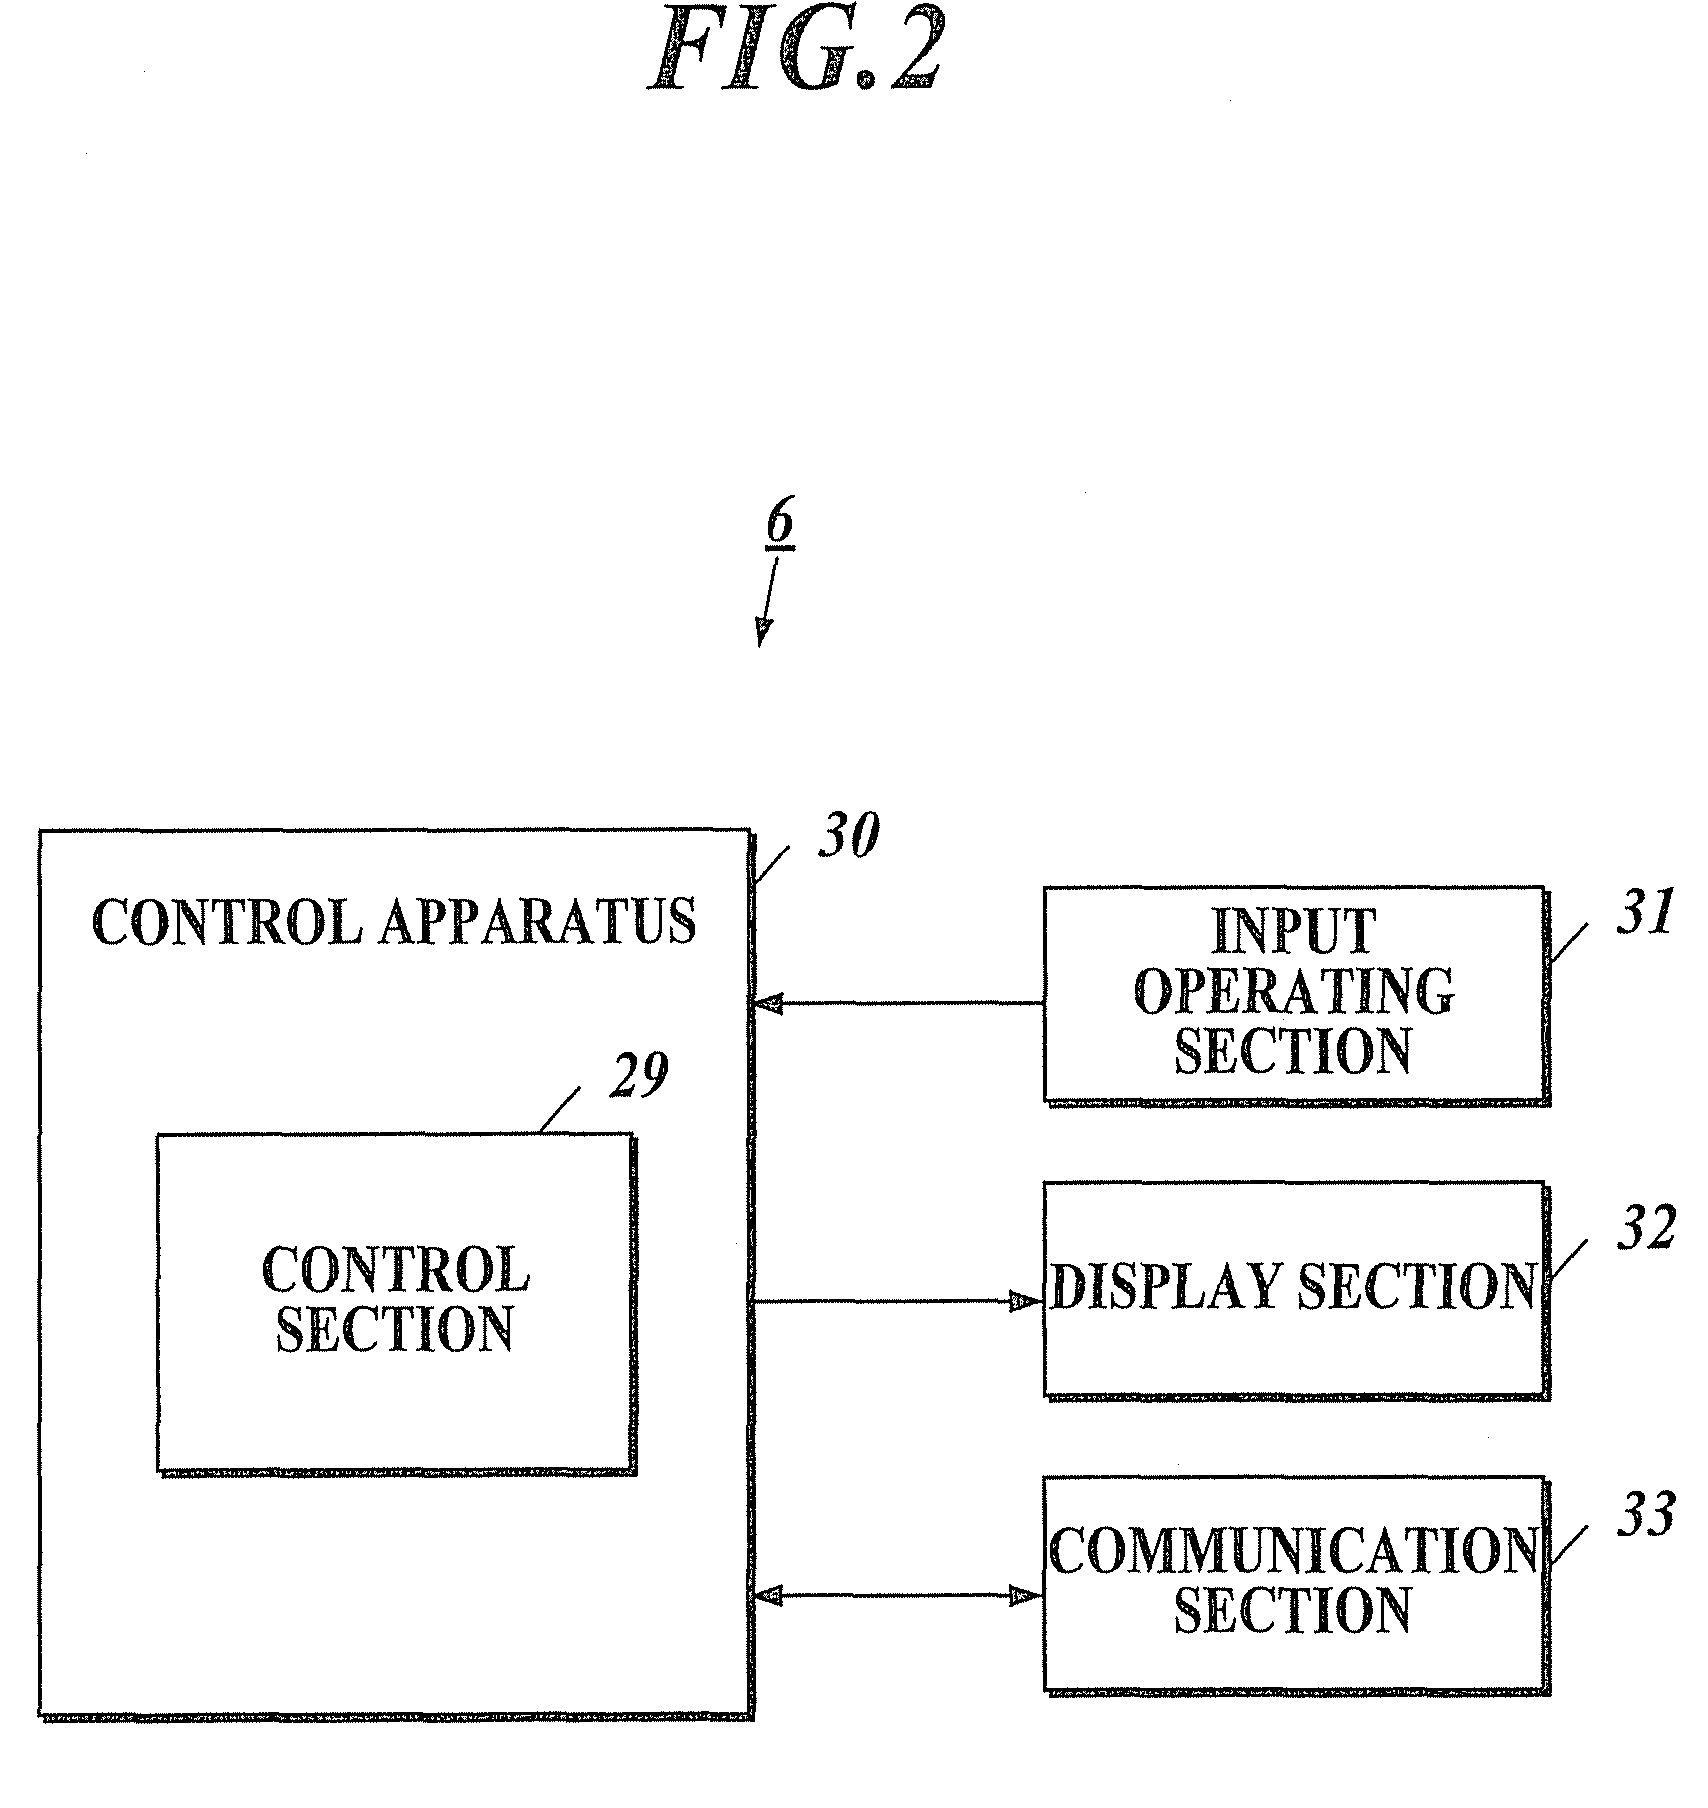 Radiation image radiographing system